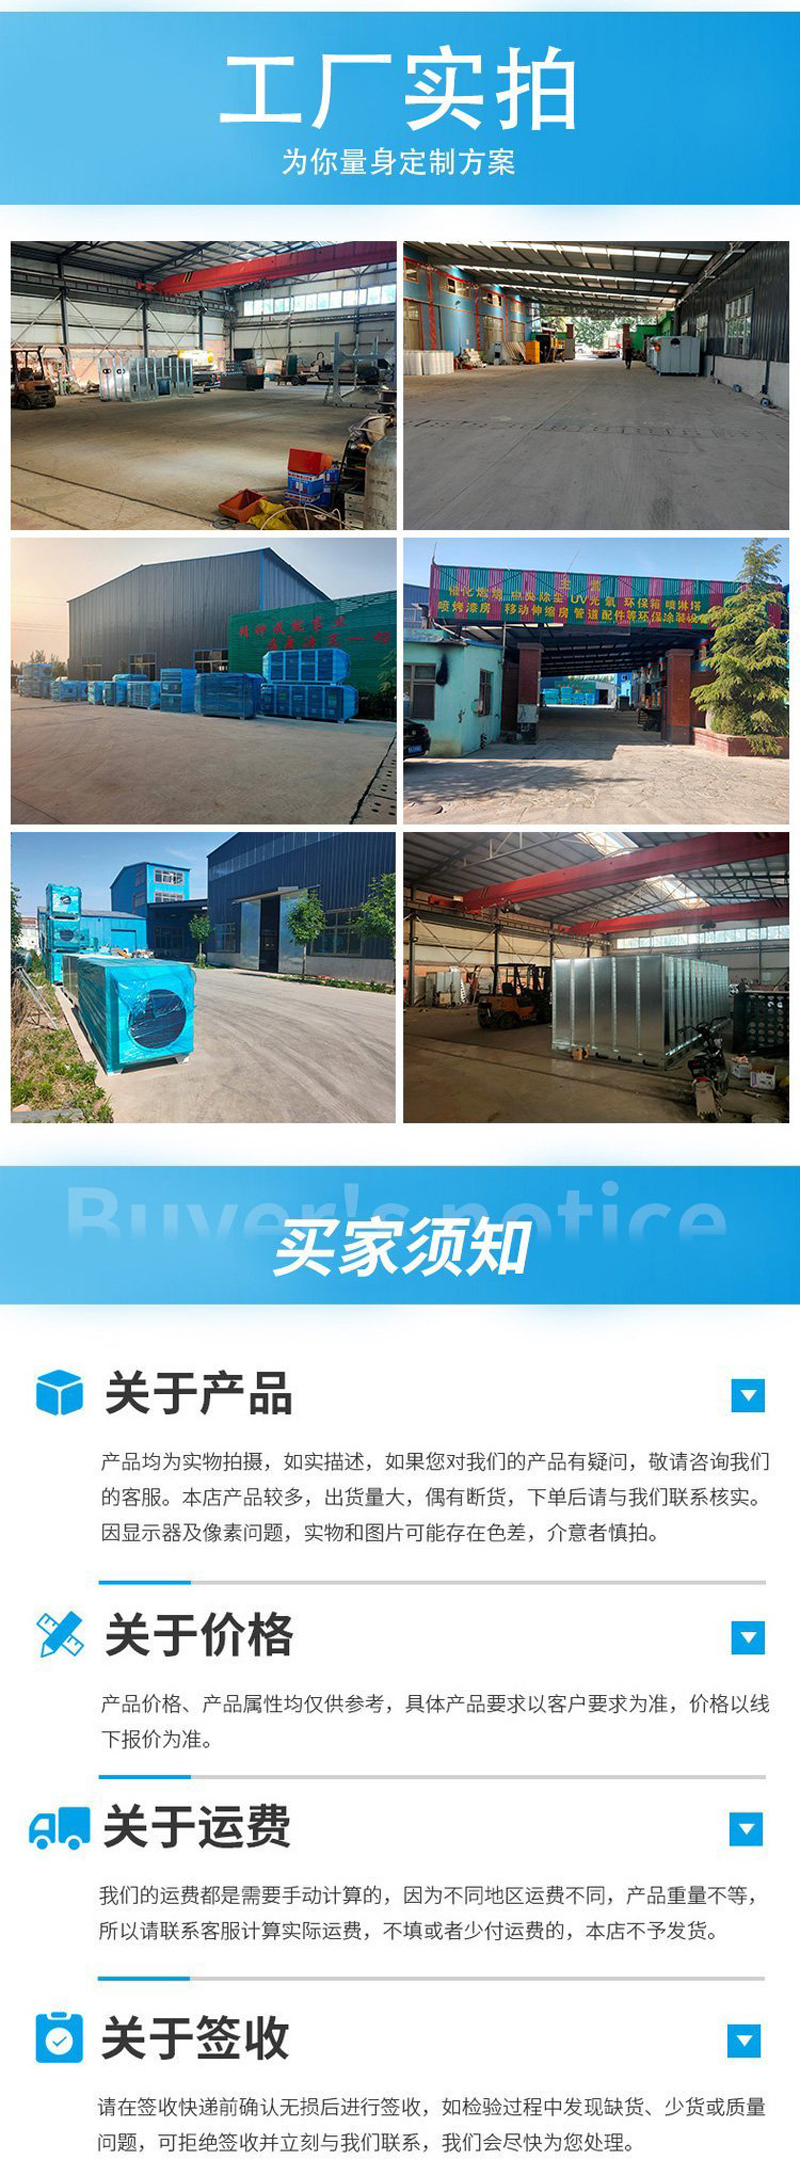 Pulse bag dust collector, woodworking bag vacuum cleaner, dust treatment and environmental protection equipment, Xinjunze